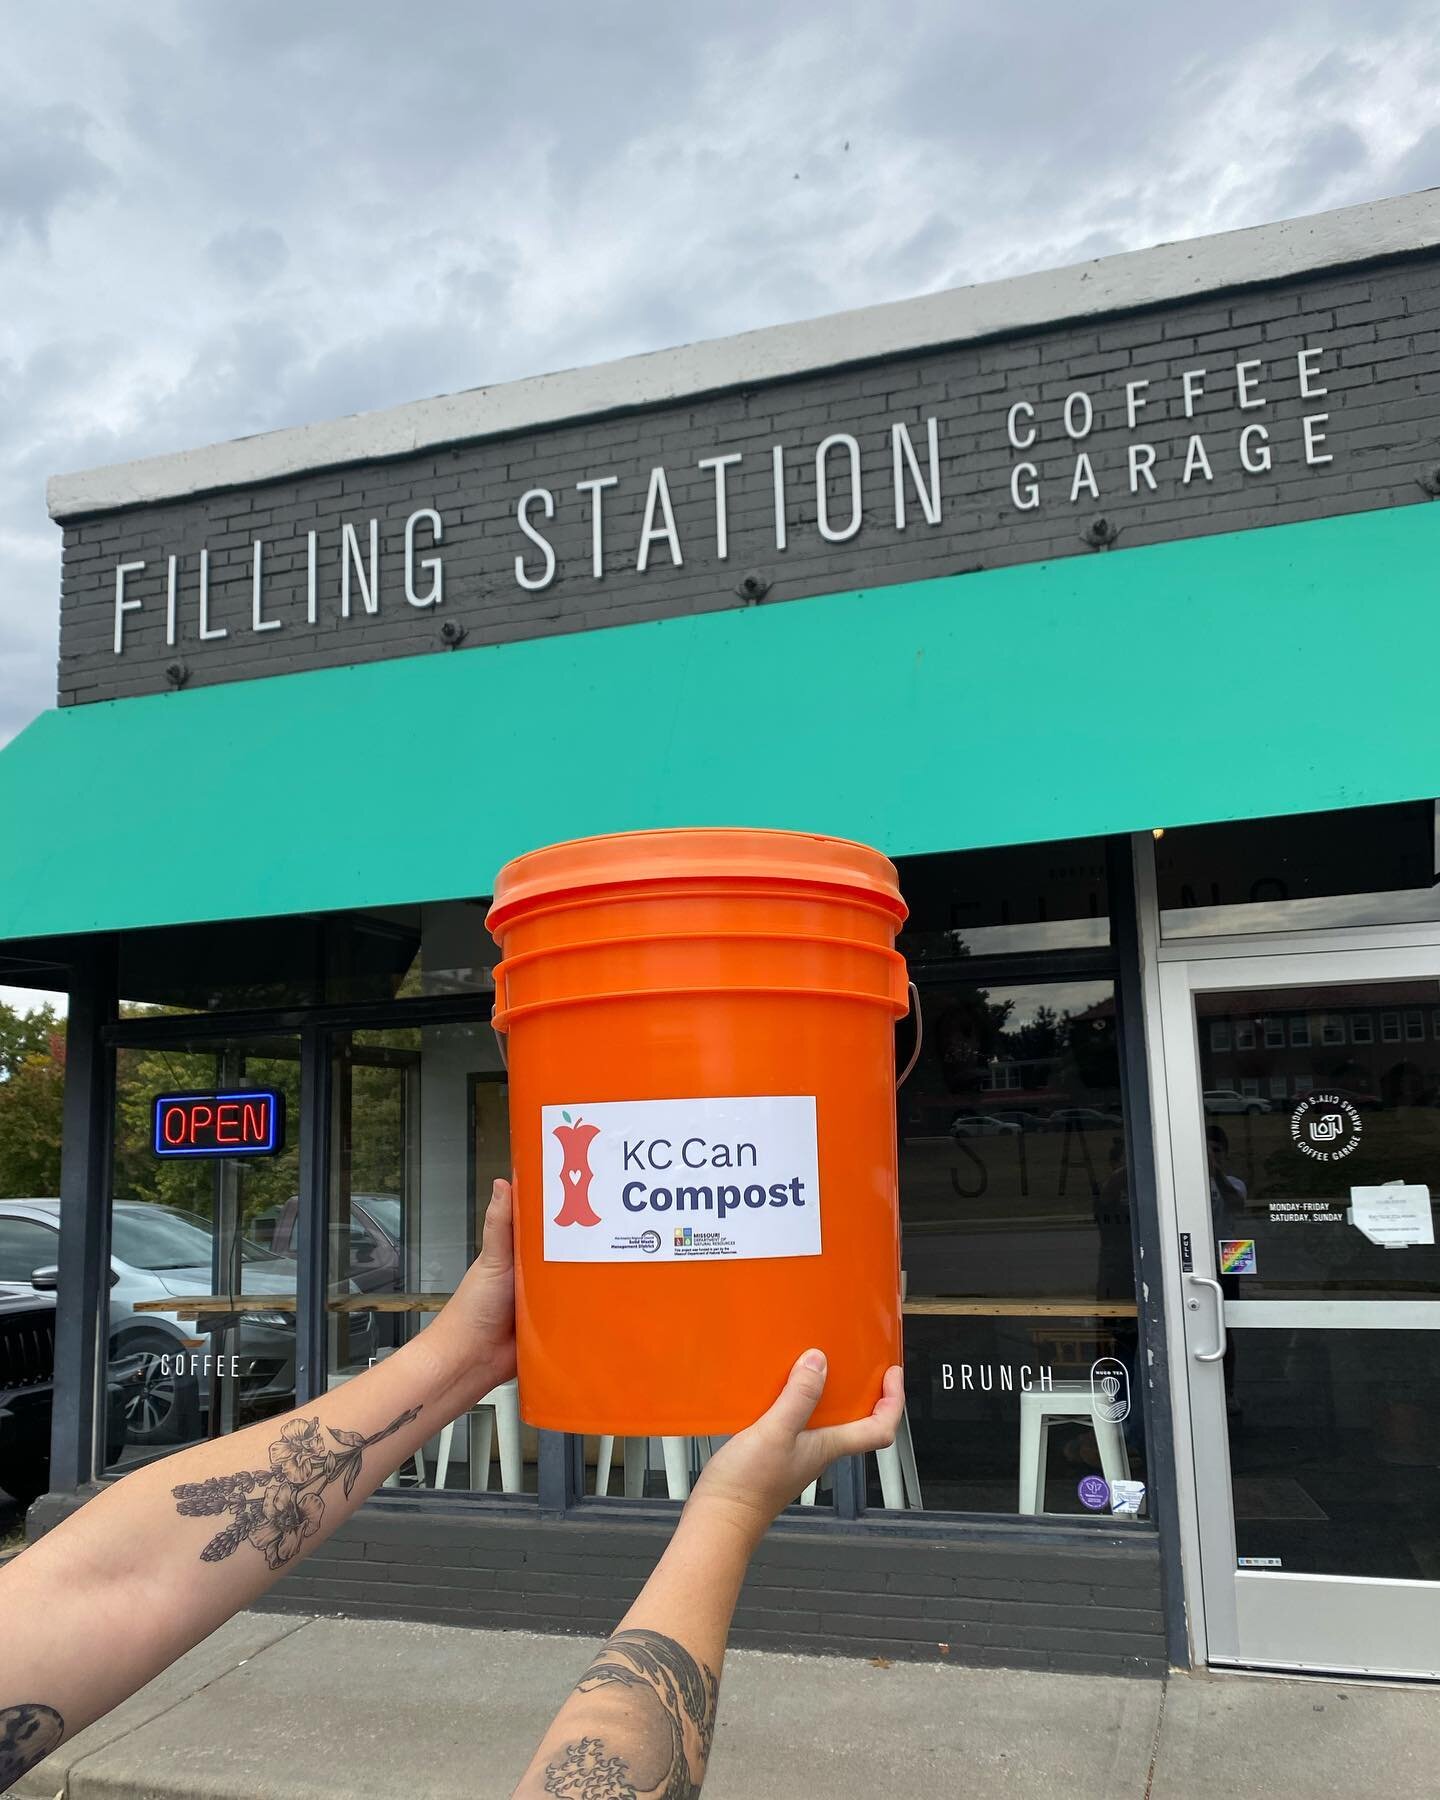 ANNOUNCEMENT: Our newest Community Partner is here: Filling Station in OP! Stop by to grab a fresh juice or a snack - we&rsquo;re prone to the chicken salad sandwich, ourselves - and tip your bag of compostable waste into the community KC Can. If you